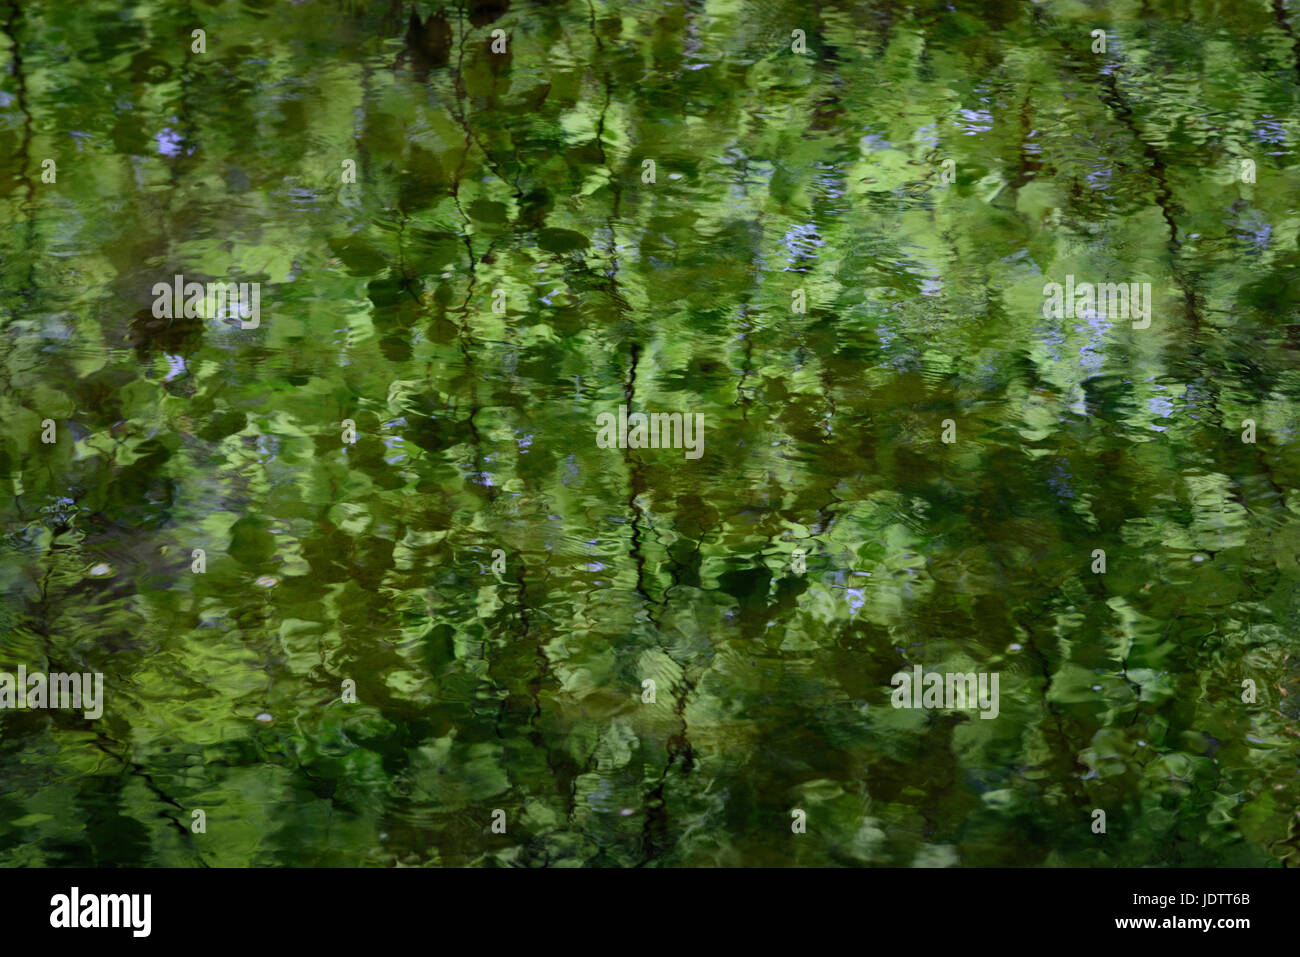 Abstract impressionist landscape image showing reflection of trees and leaves in the water of a river or lake Stock Photo